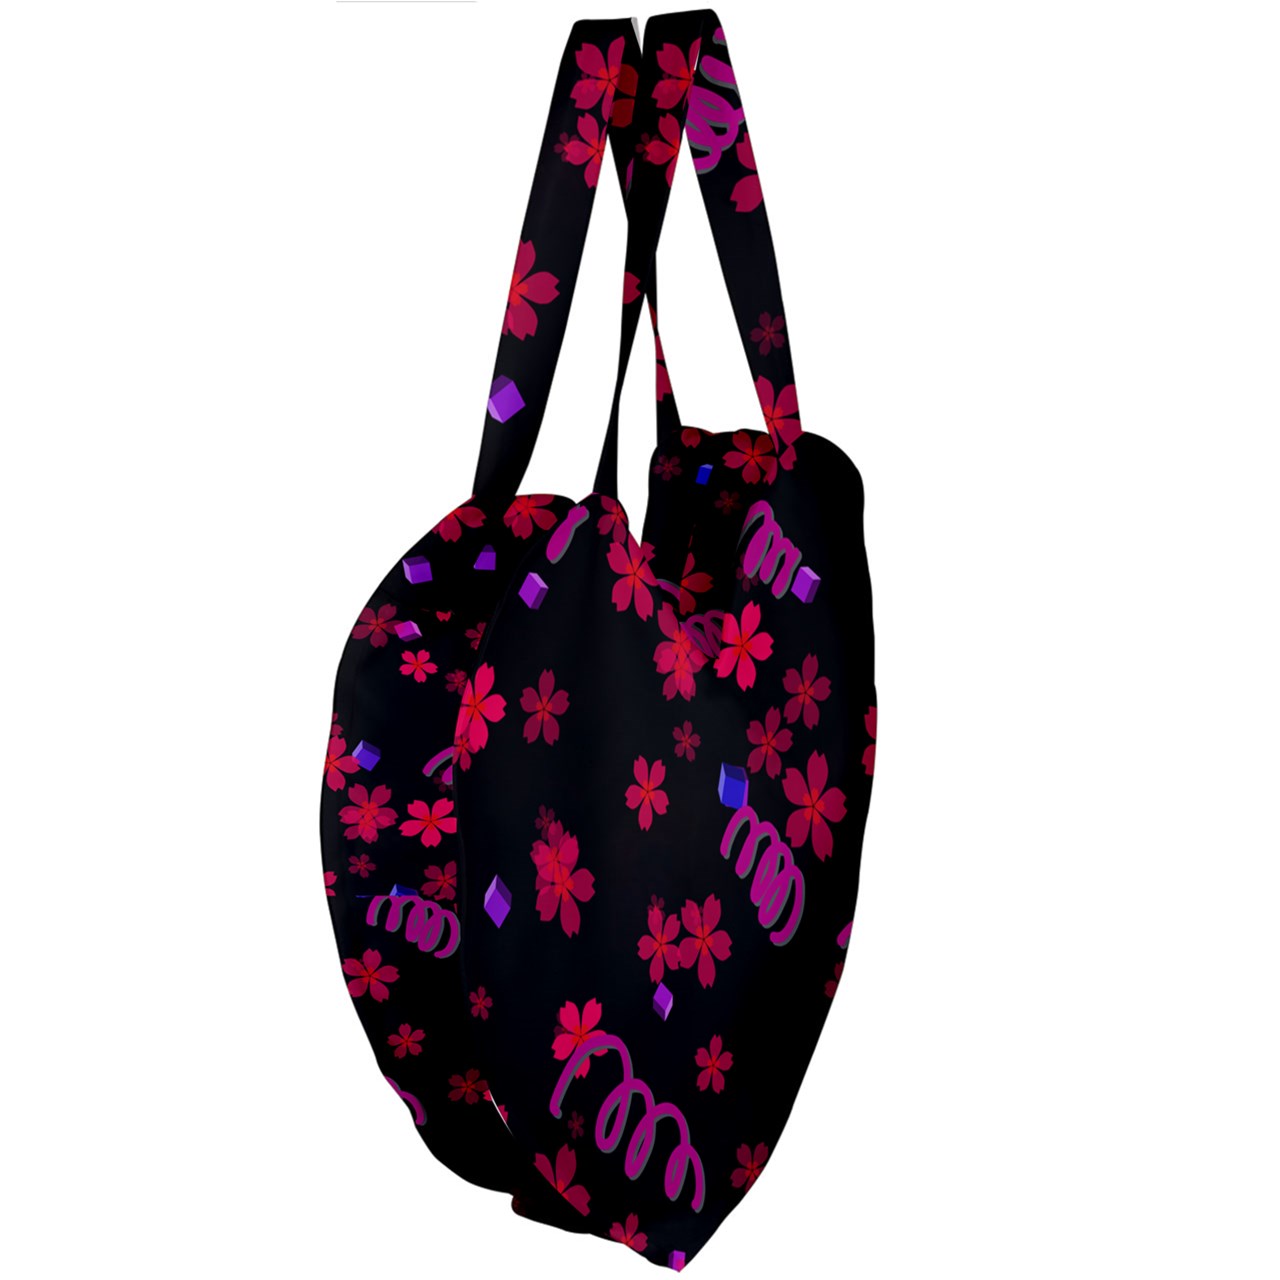 springed flowers Giant Heart Shaped Tote